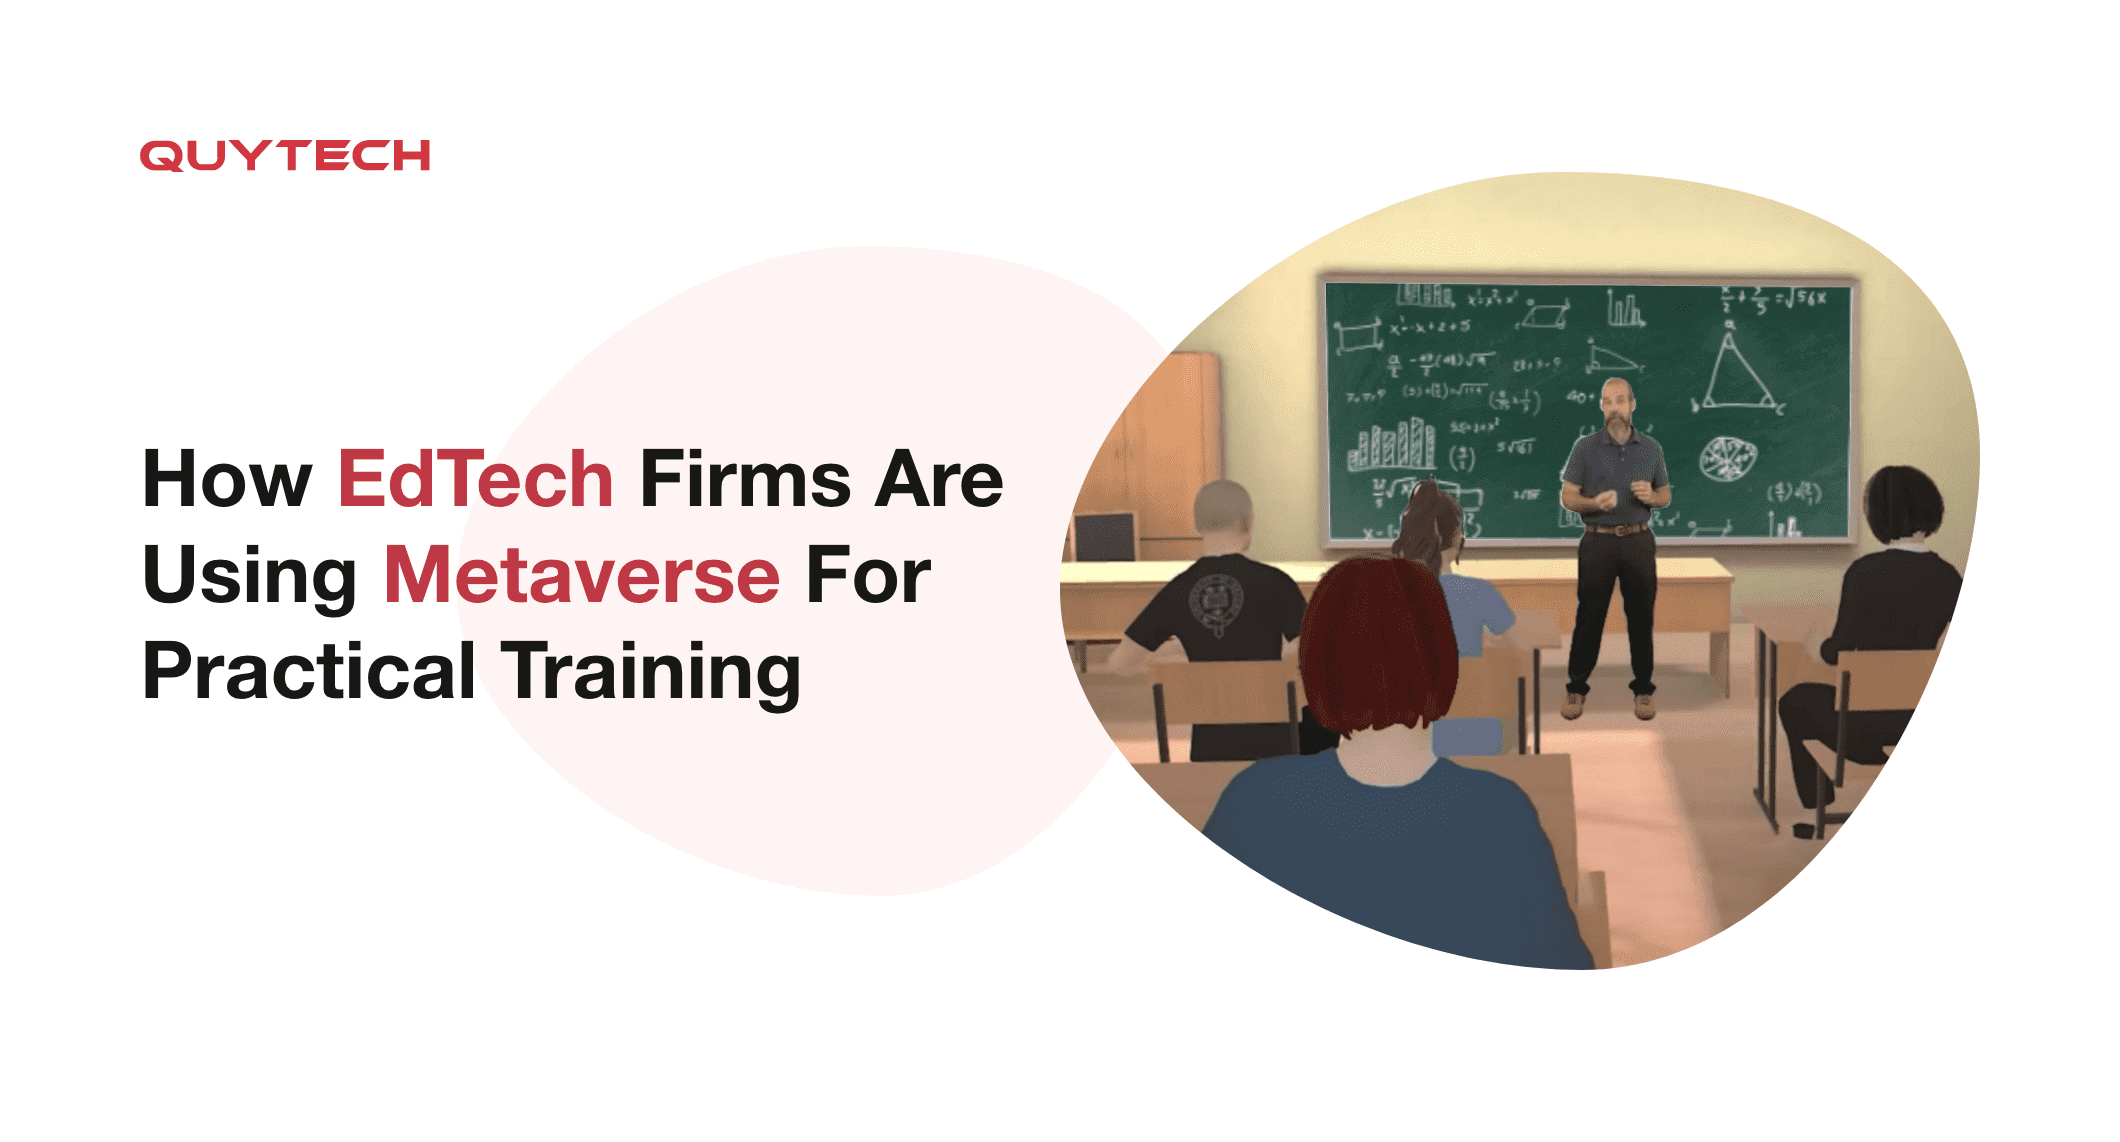 How EdTech Firms are Using Metaverse for Practical Training